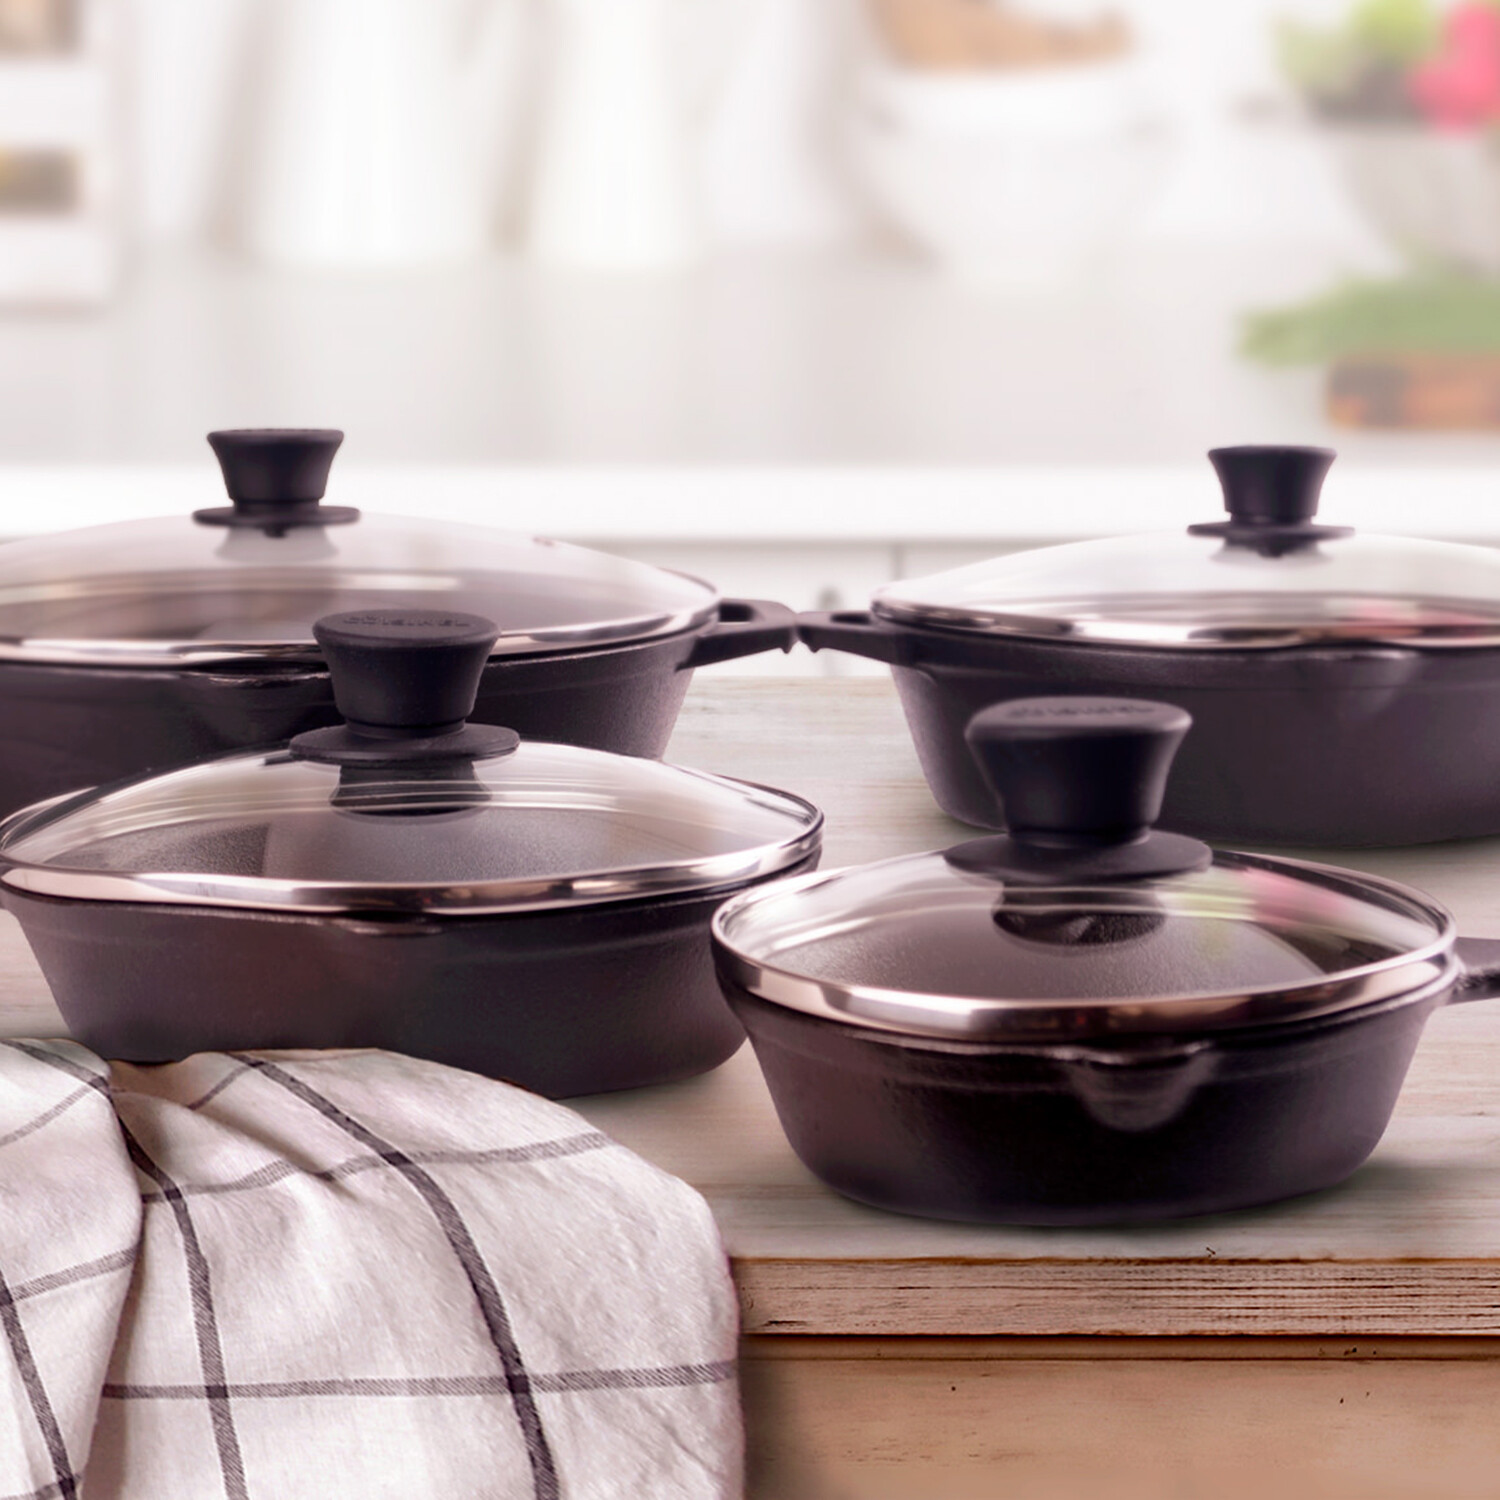 Finally go cast iron with Cuisinel cookware and accessories from